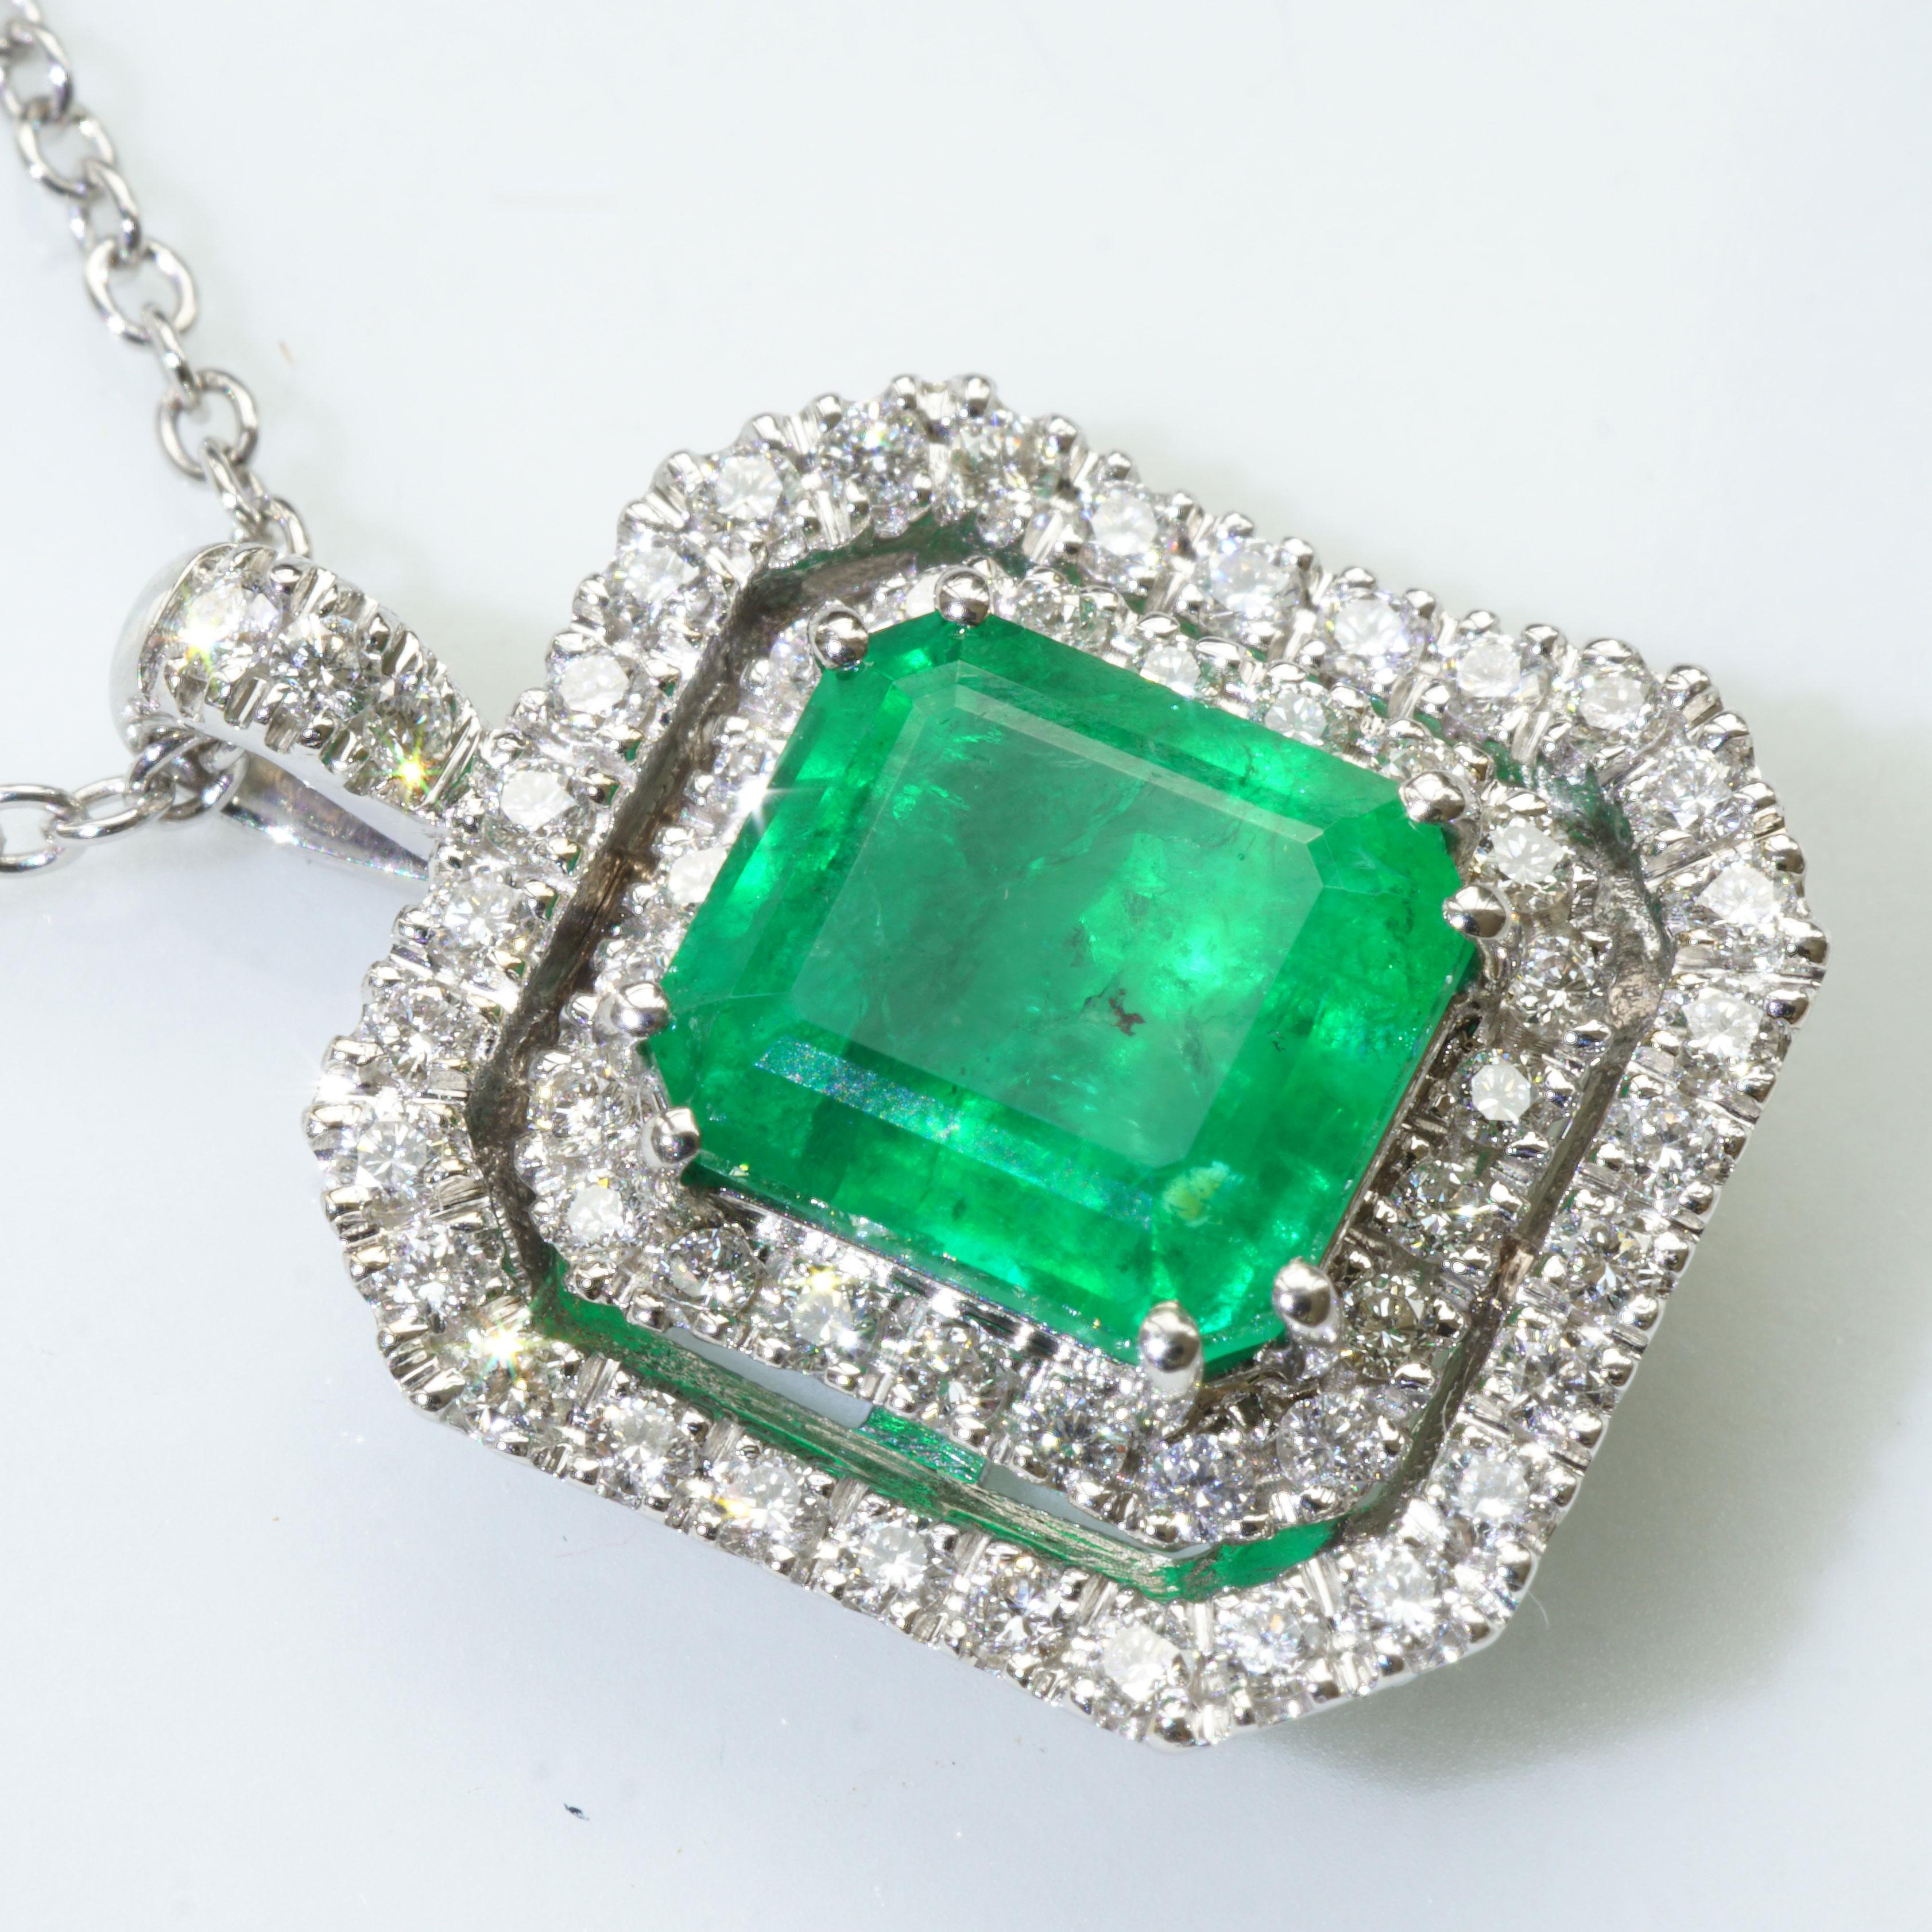 Emerald Diamond Pendant 3 Ct 0.41 Ct White Gold Panjshir Afghanistan Great Color For Sale 2